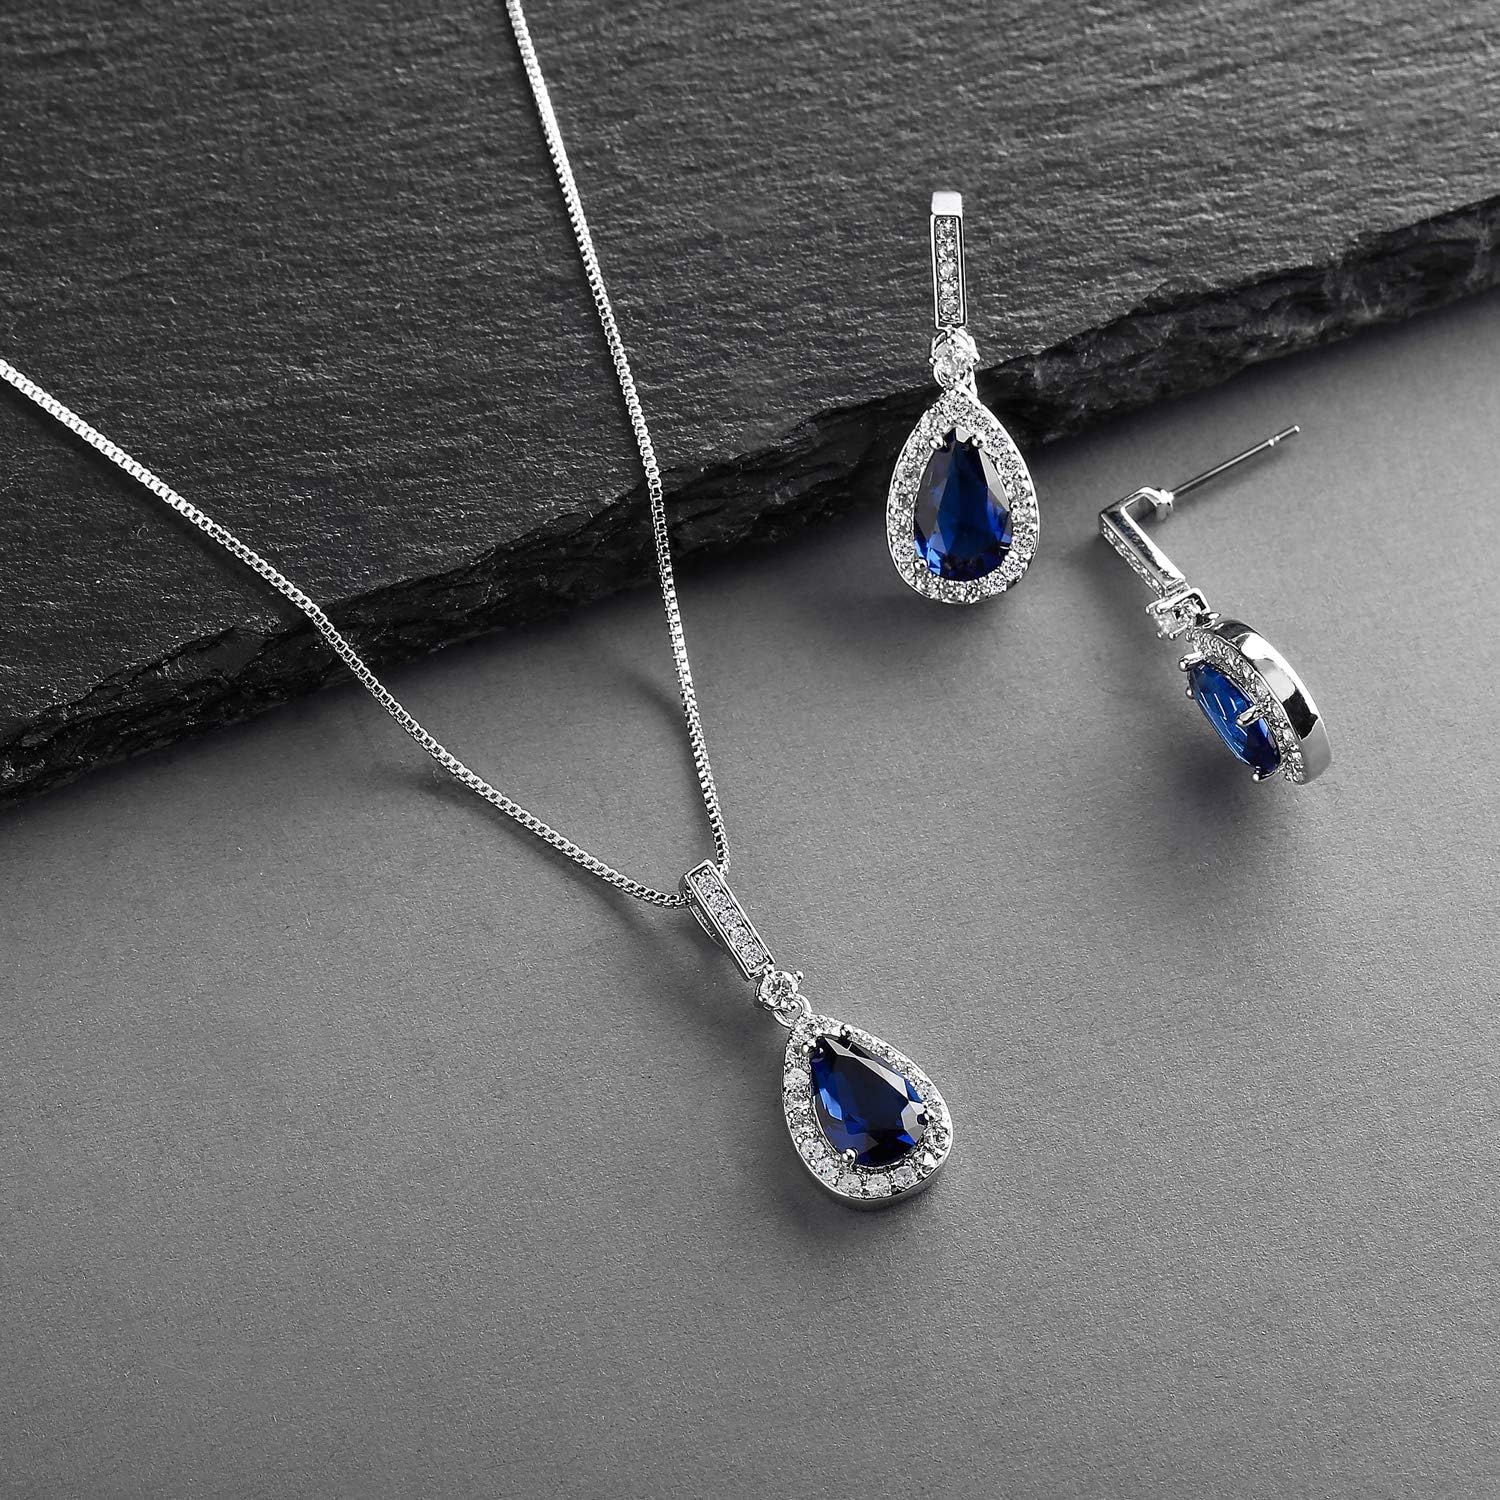 Mariell Bridal Wedding Necklace and Earring Set, Sapphire Blue CZ Pendant and Drop Earrings for Brides